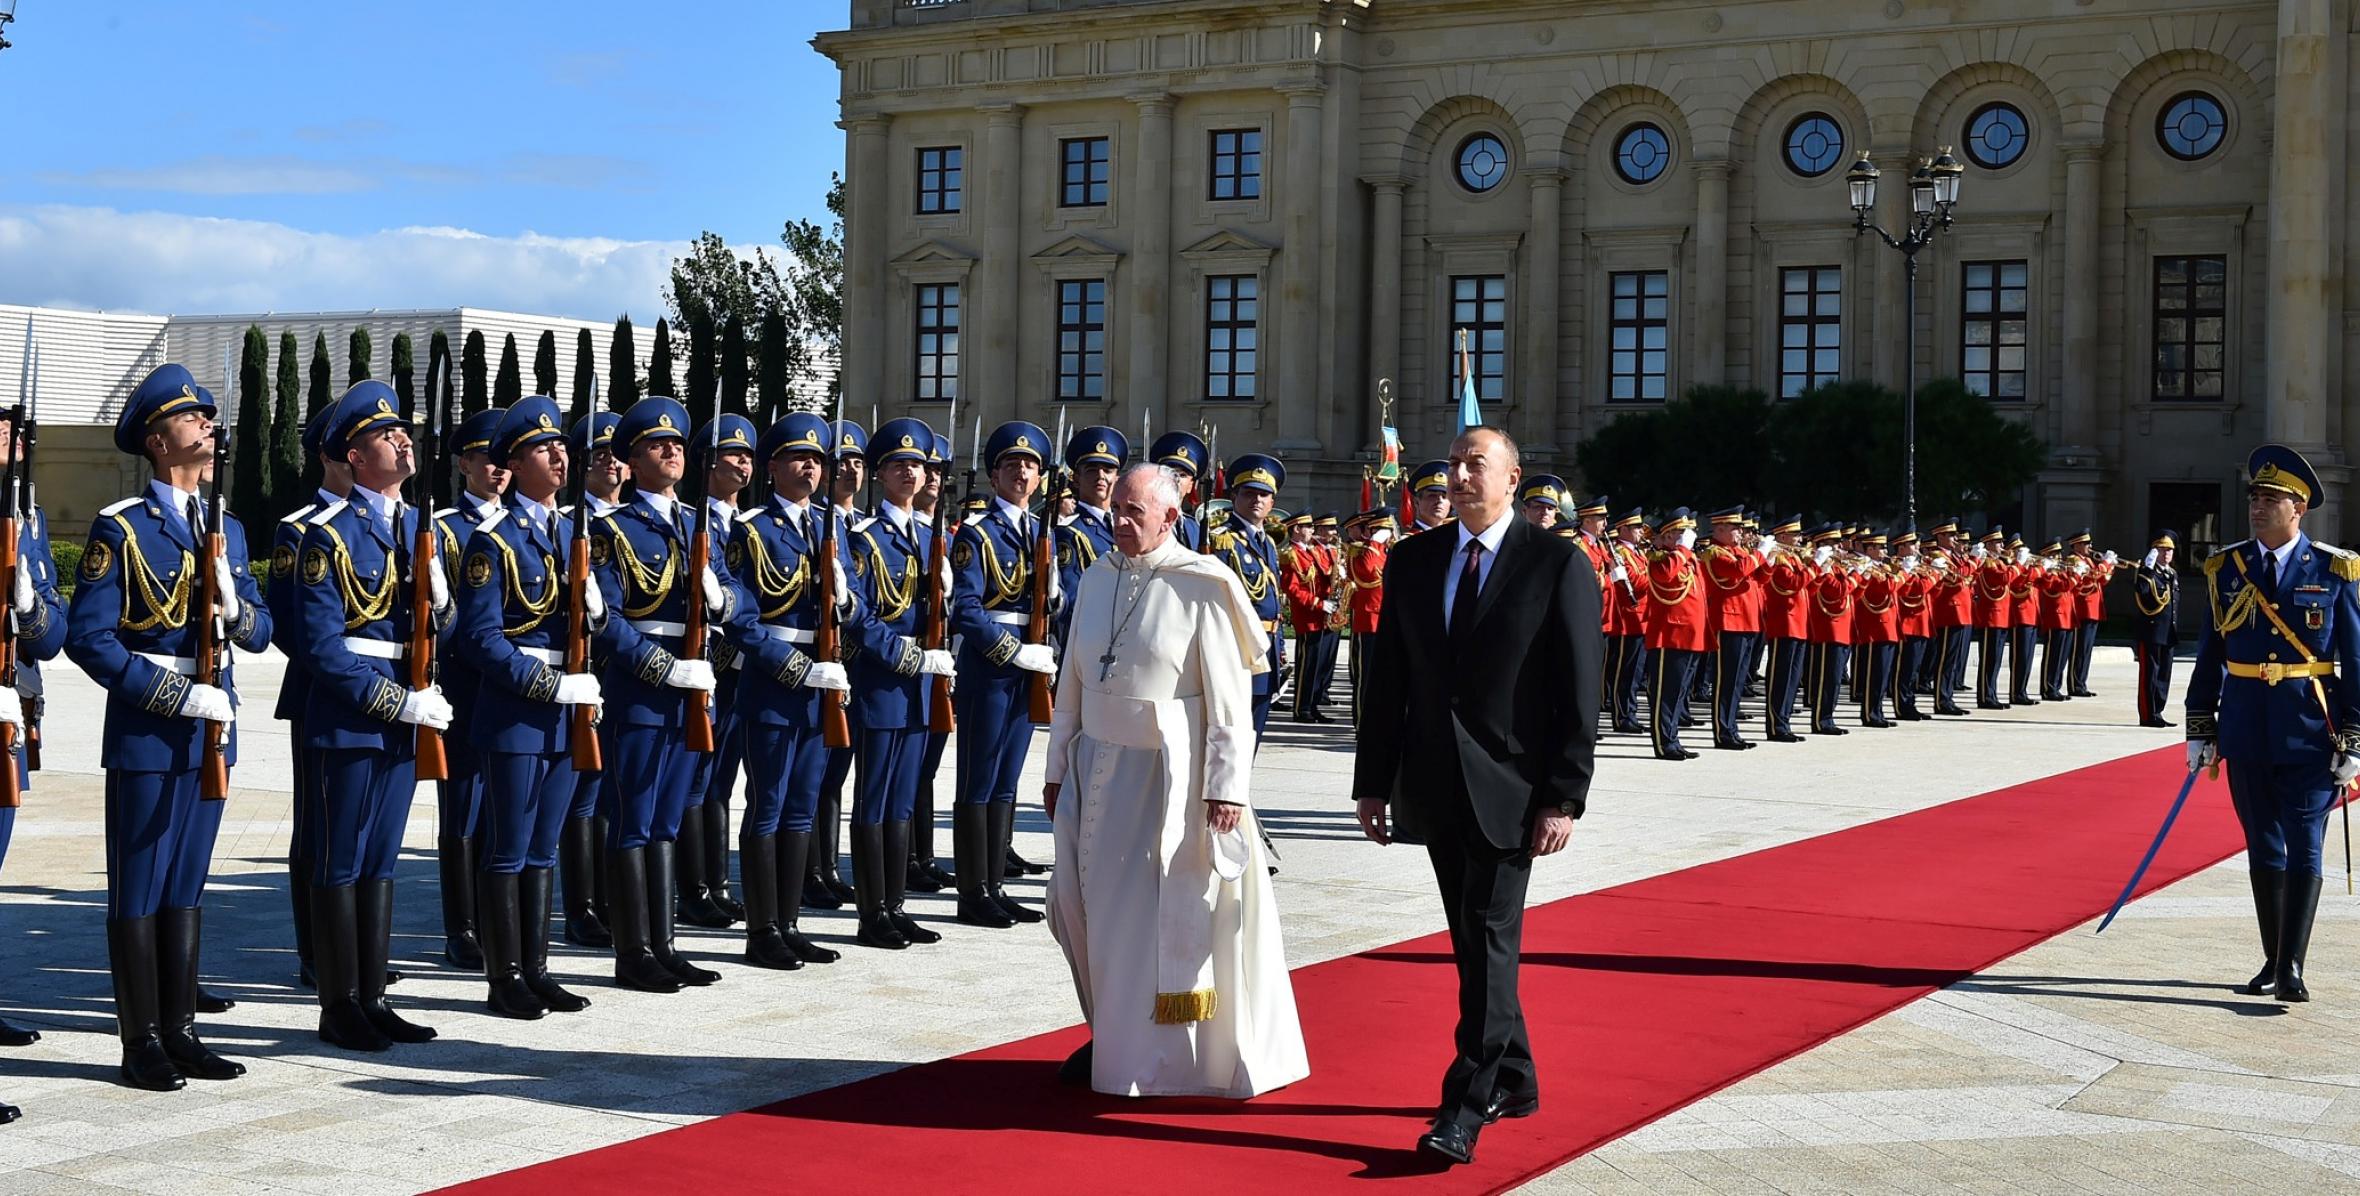 Official welcoming ceremony was held for Pope Francis